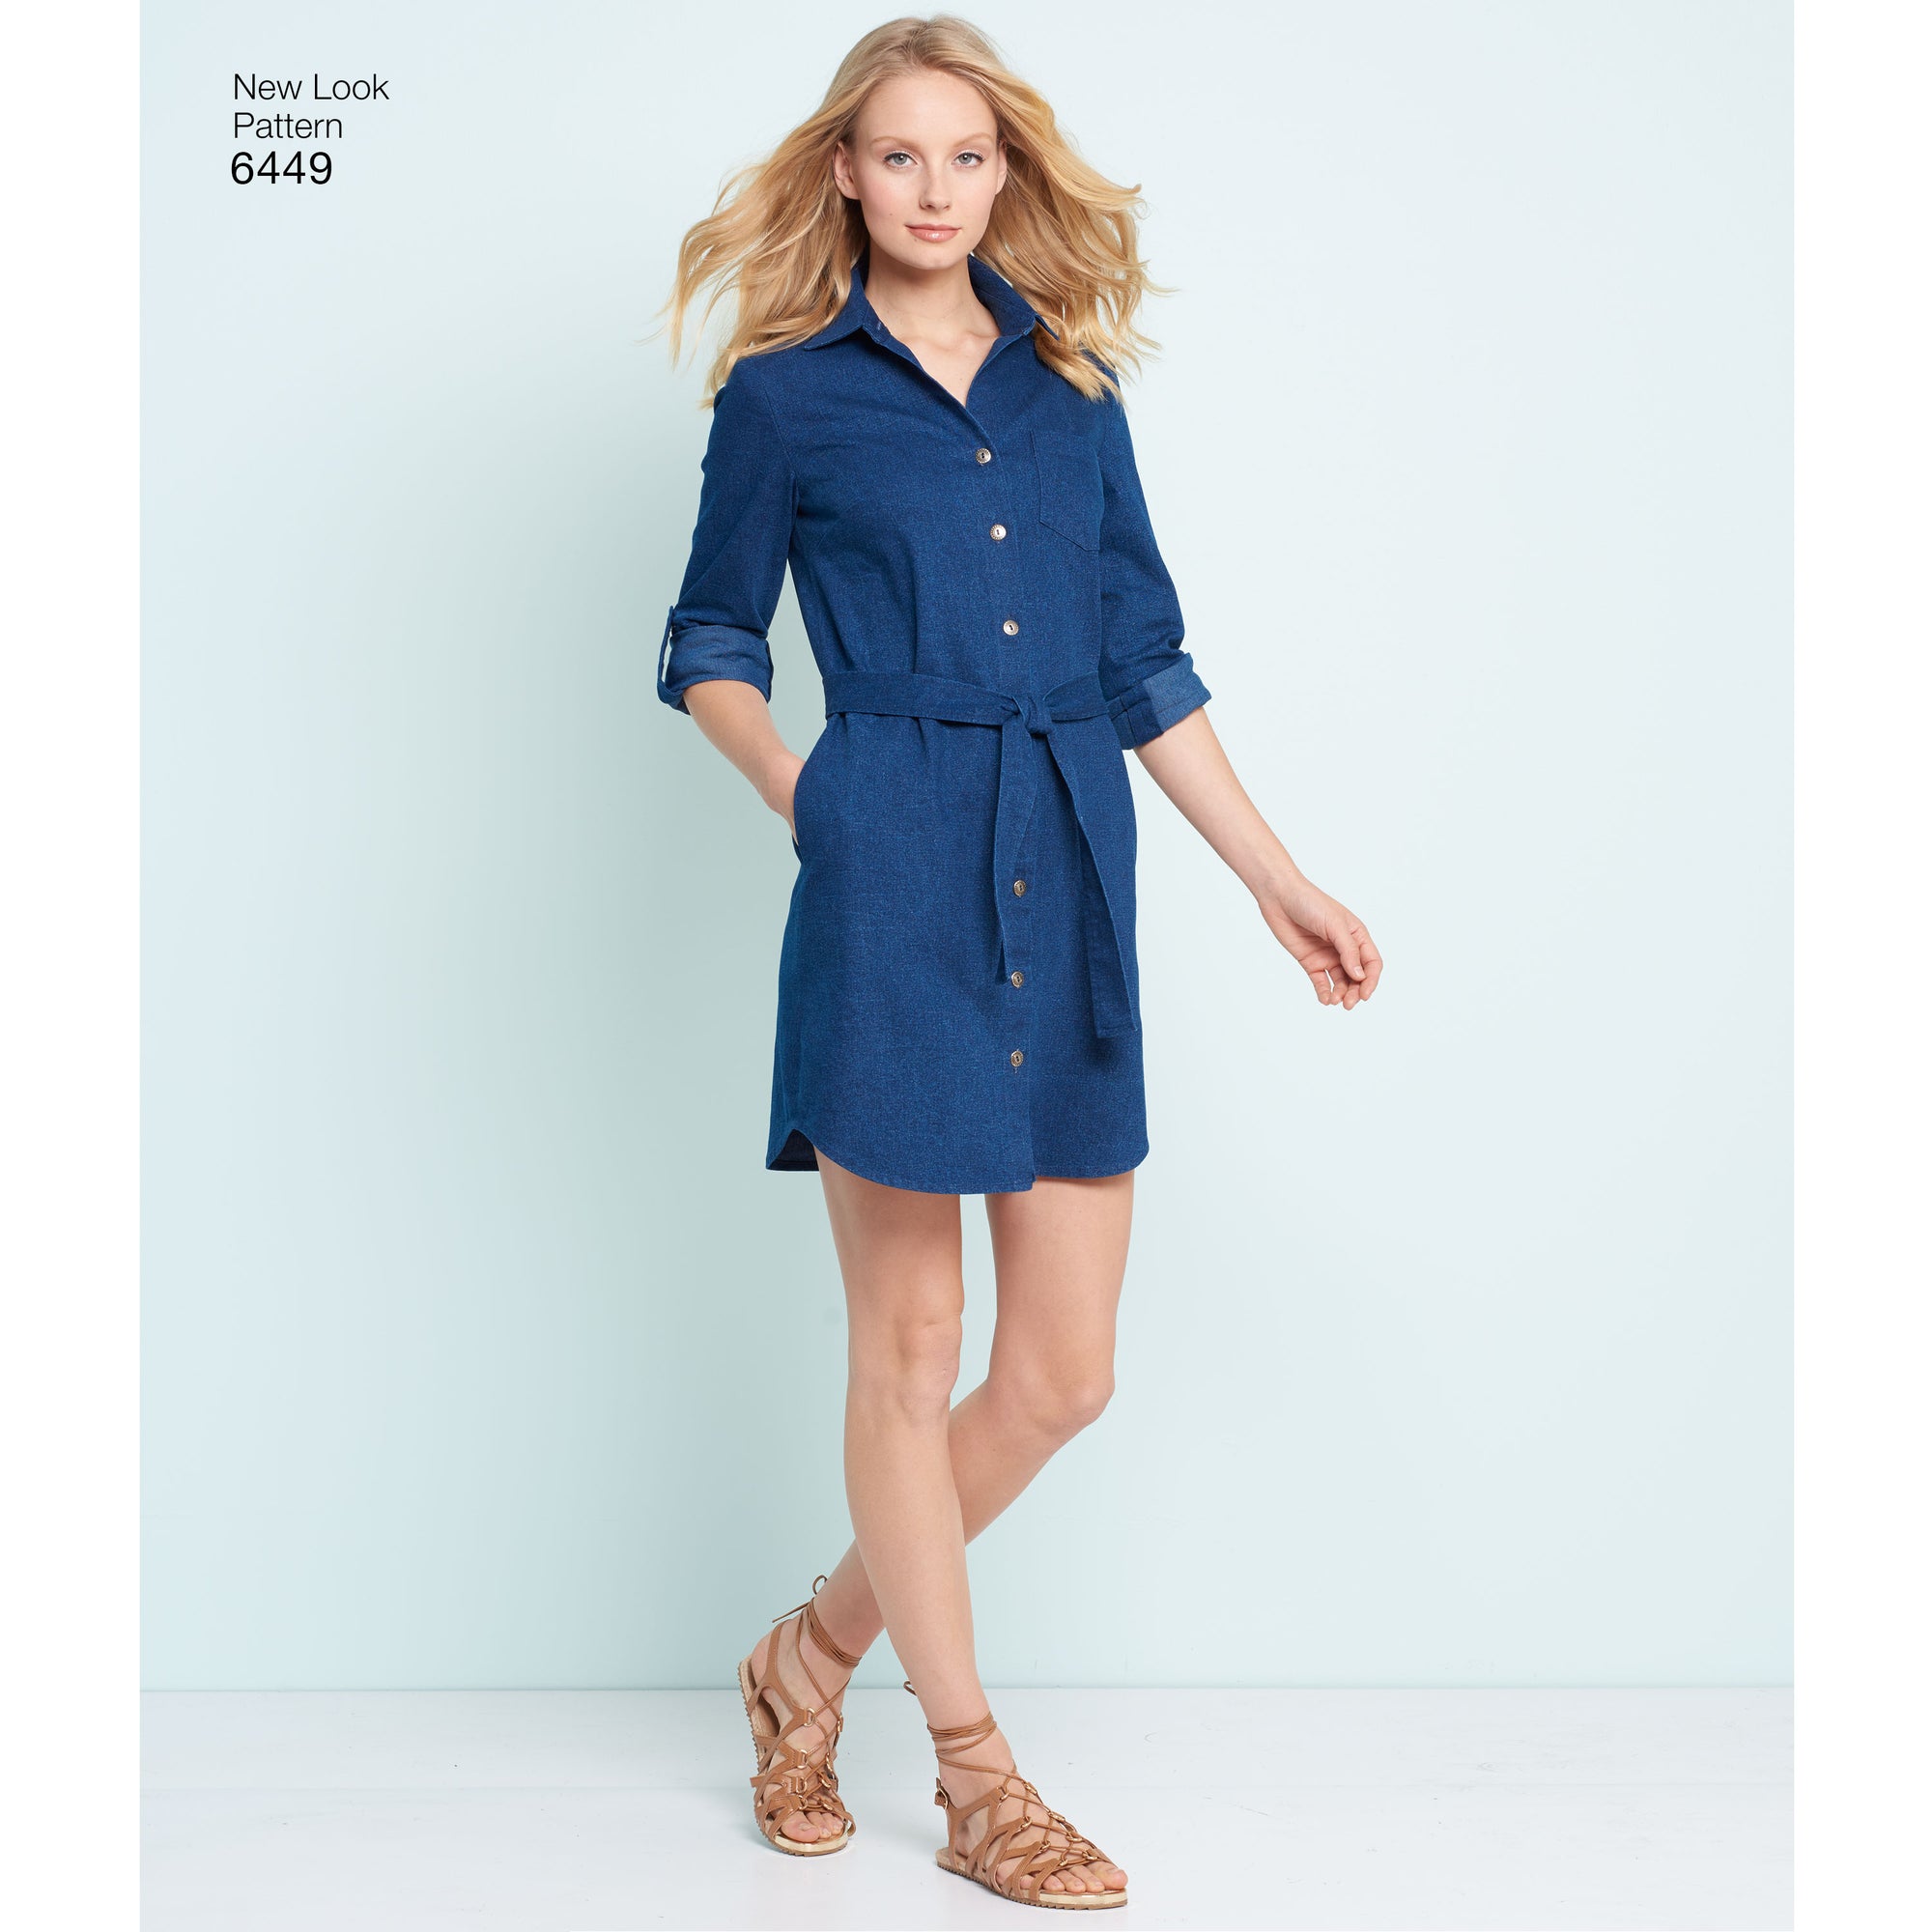 6449 Misses' Easy Shirt Dress and Knit Dress